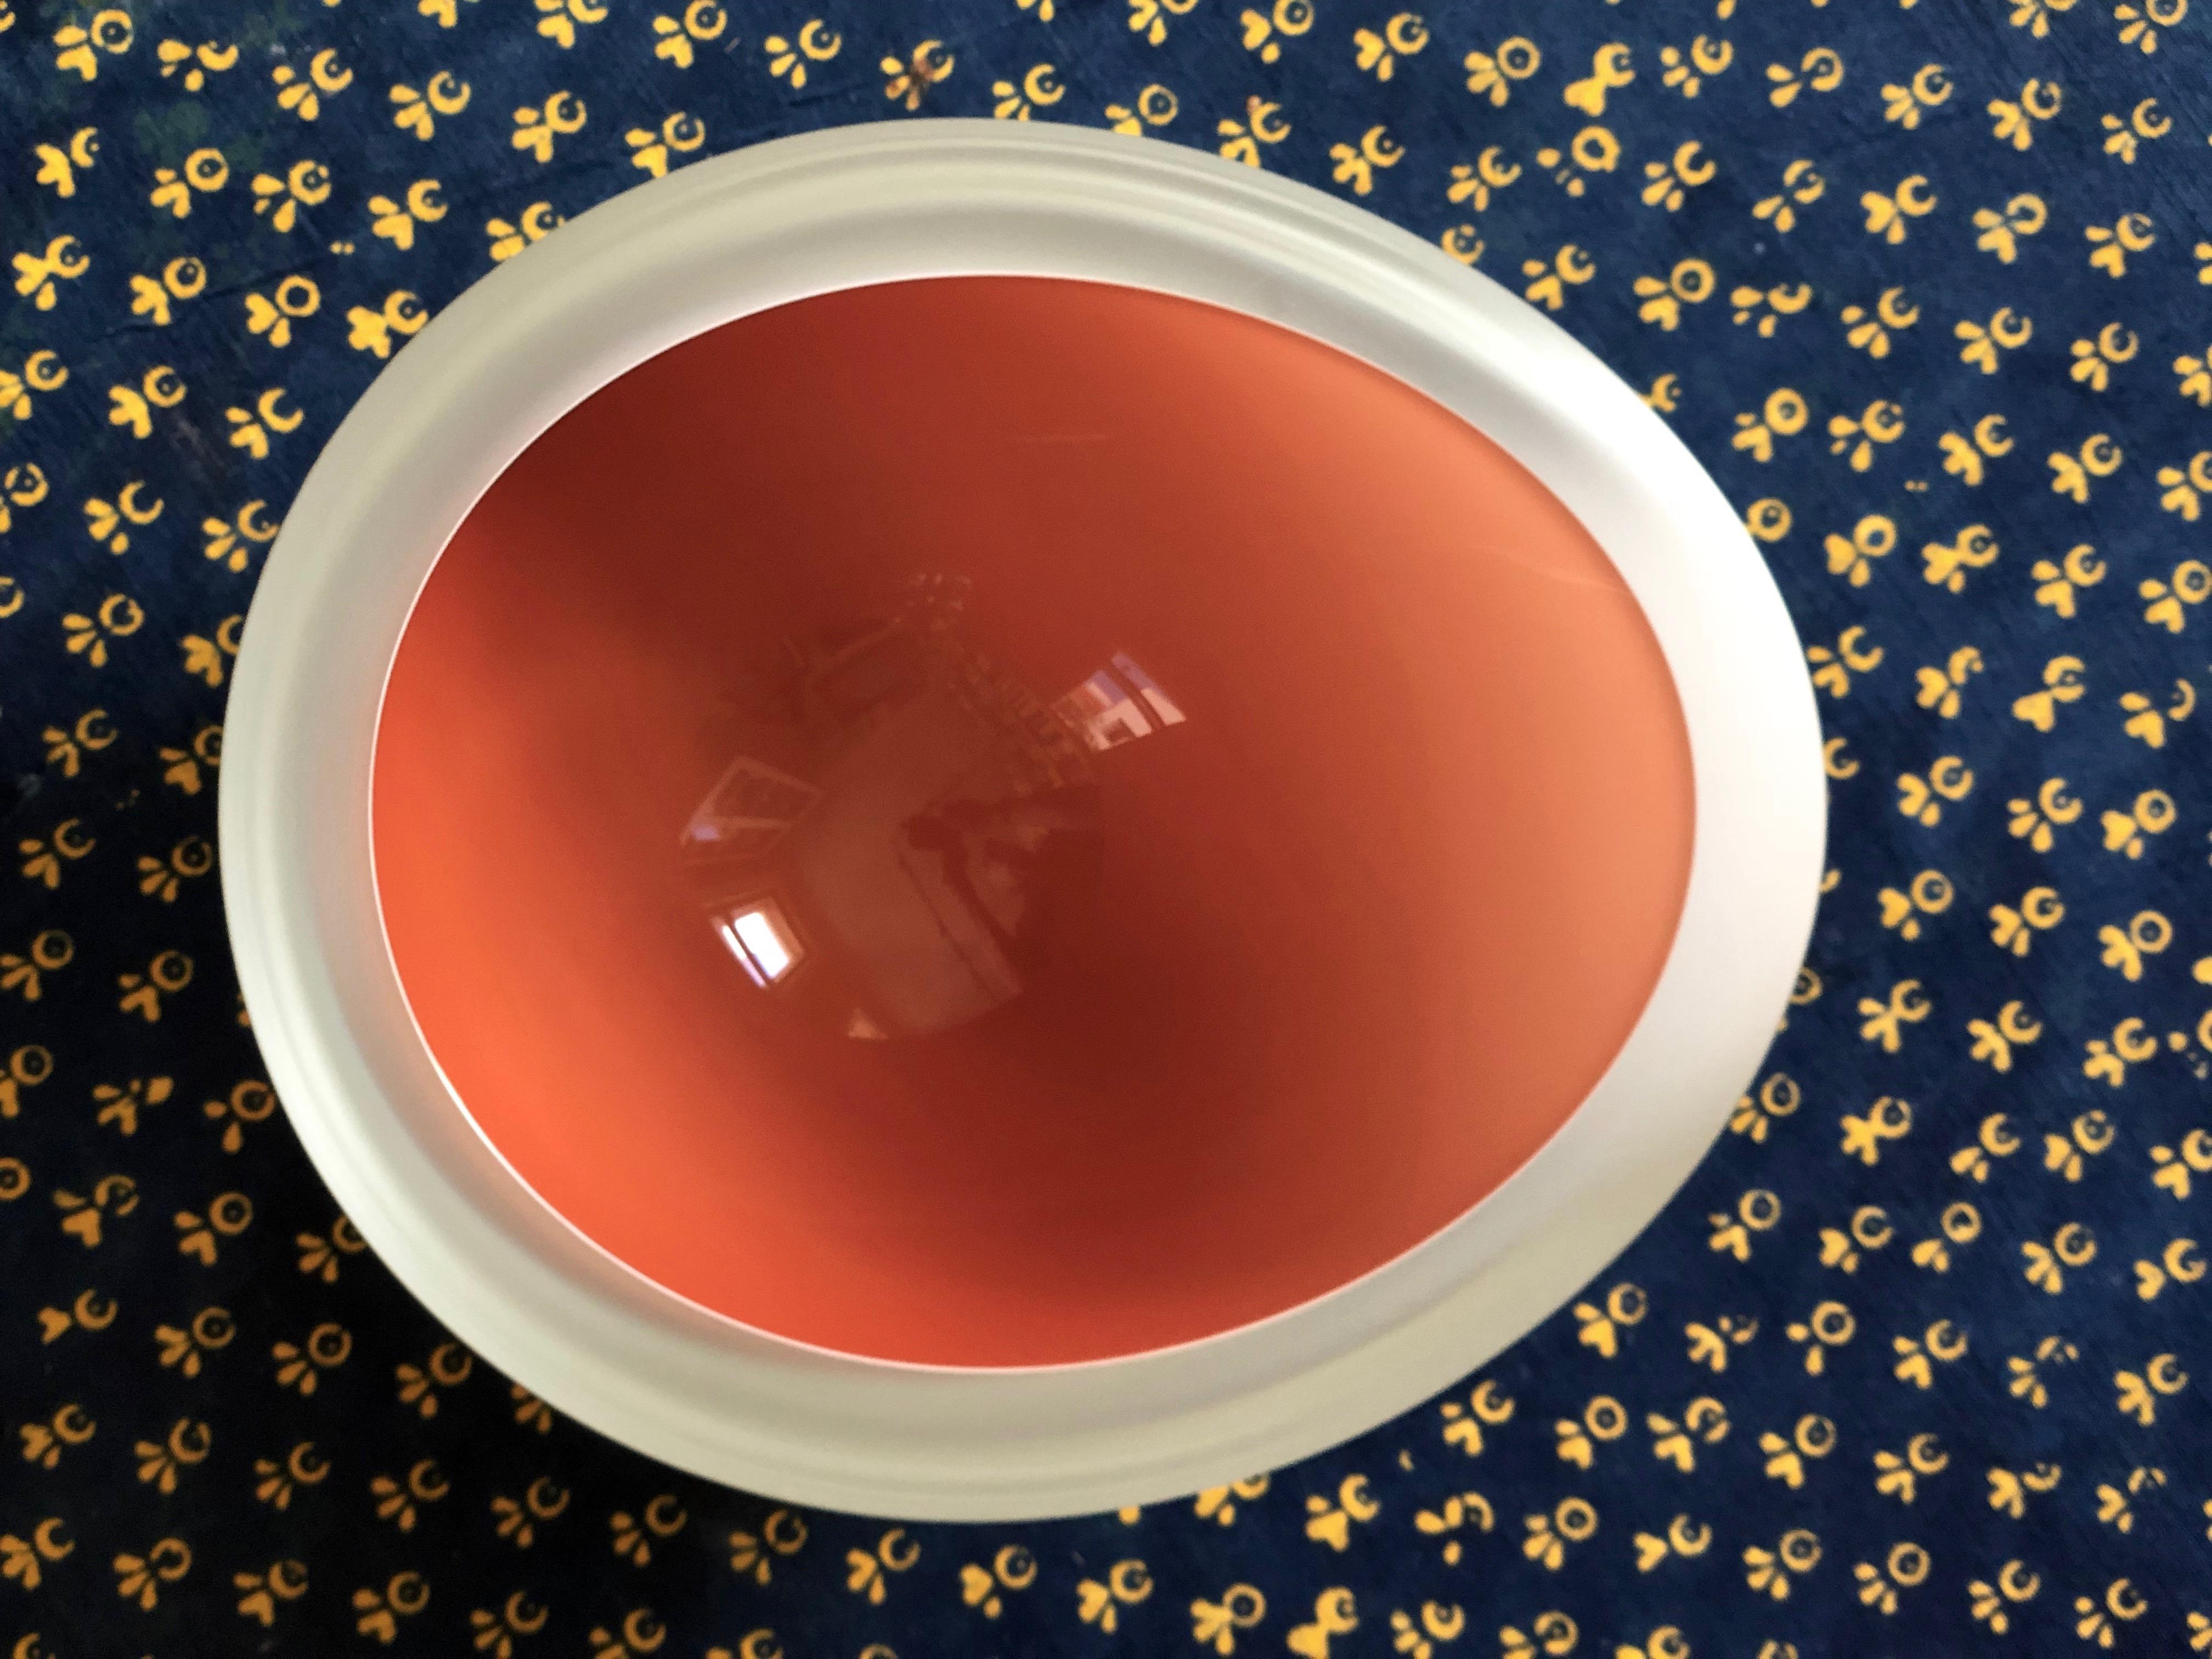 Contemporary Studio Glass Bowl in Coral Color, Made in the Czech Republic, 2010 For Sale 3